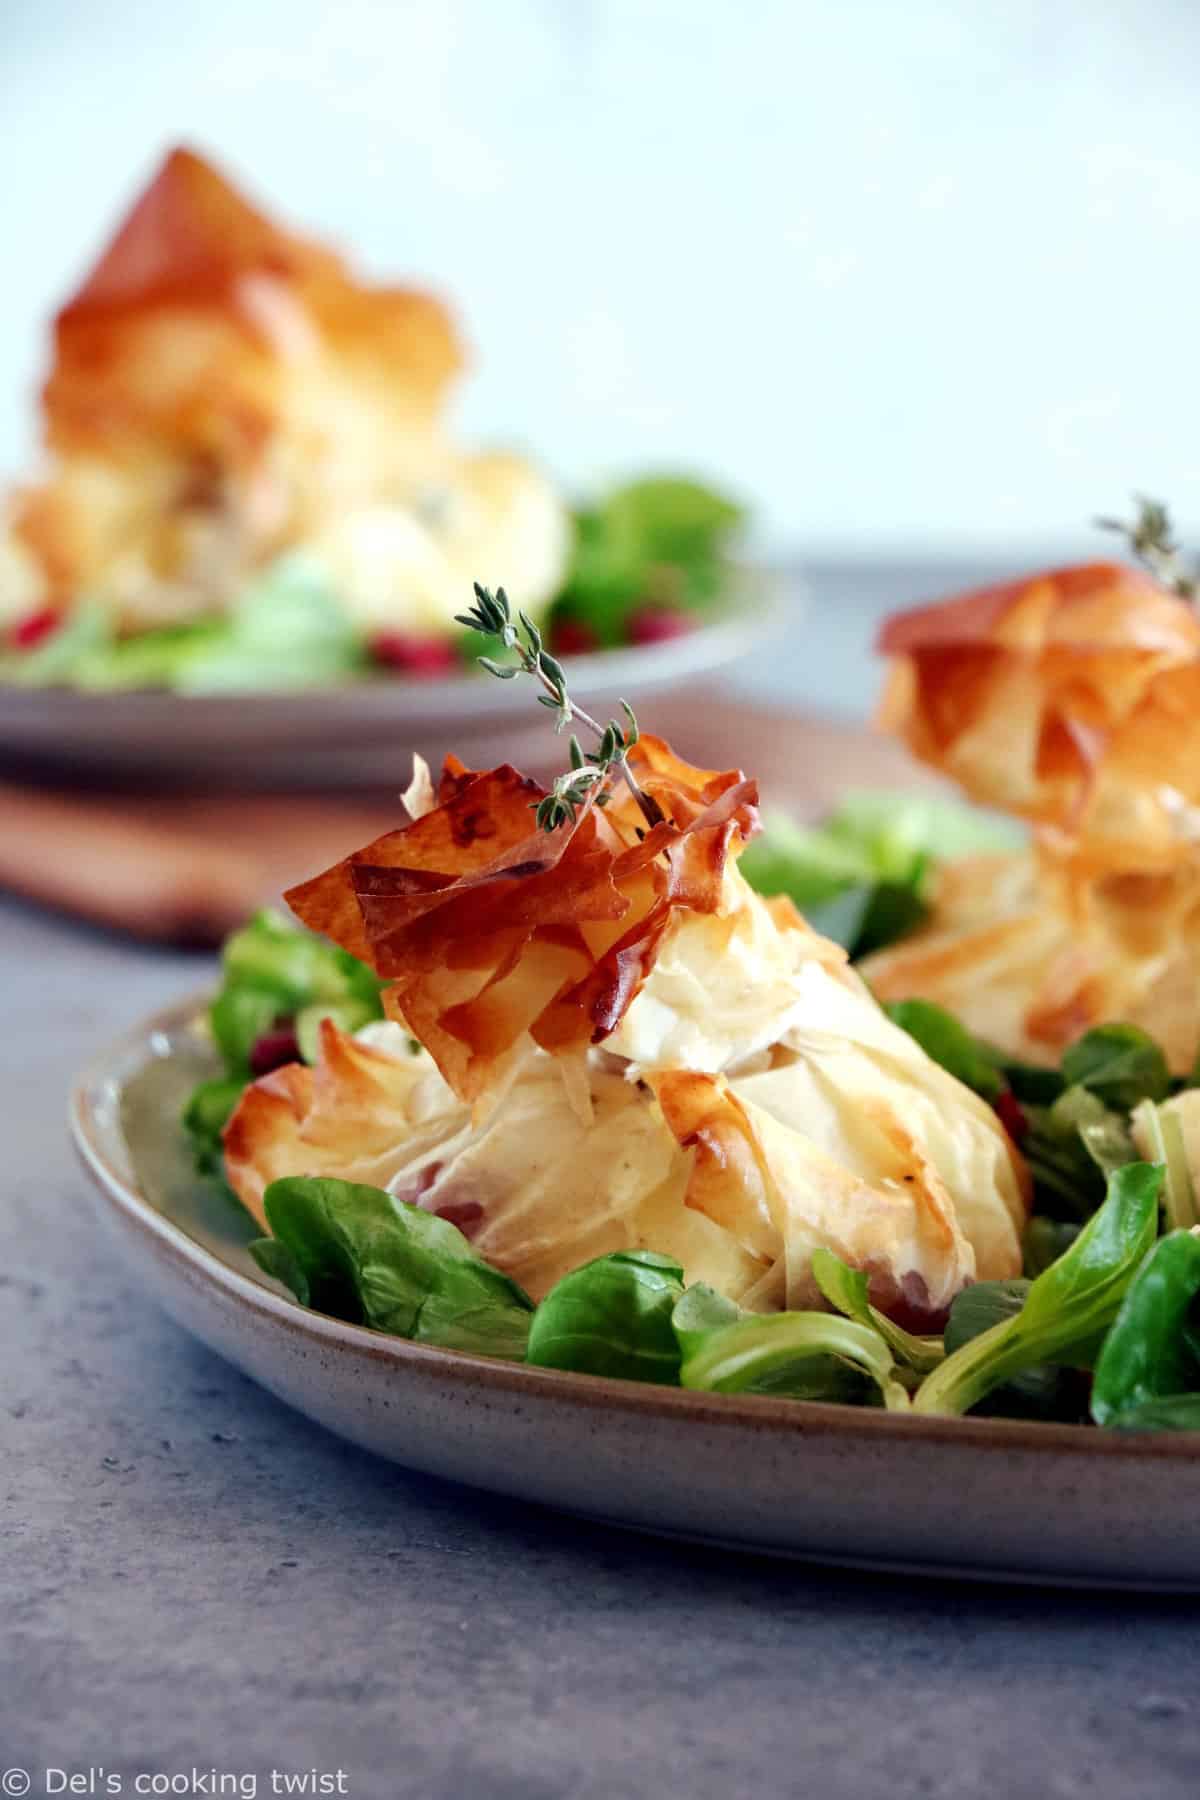 Get creative with these festive filo parcels filled with baked apple, Brie and dates. These light and flaky bundles are best served fresh from the oven.